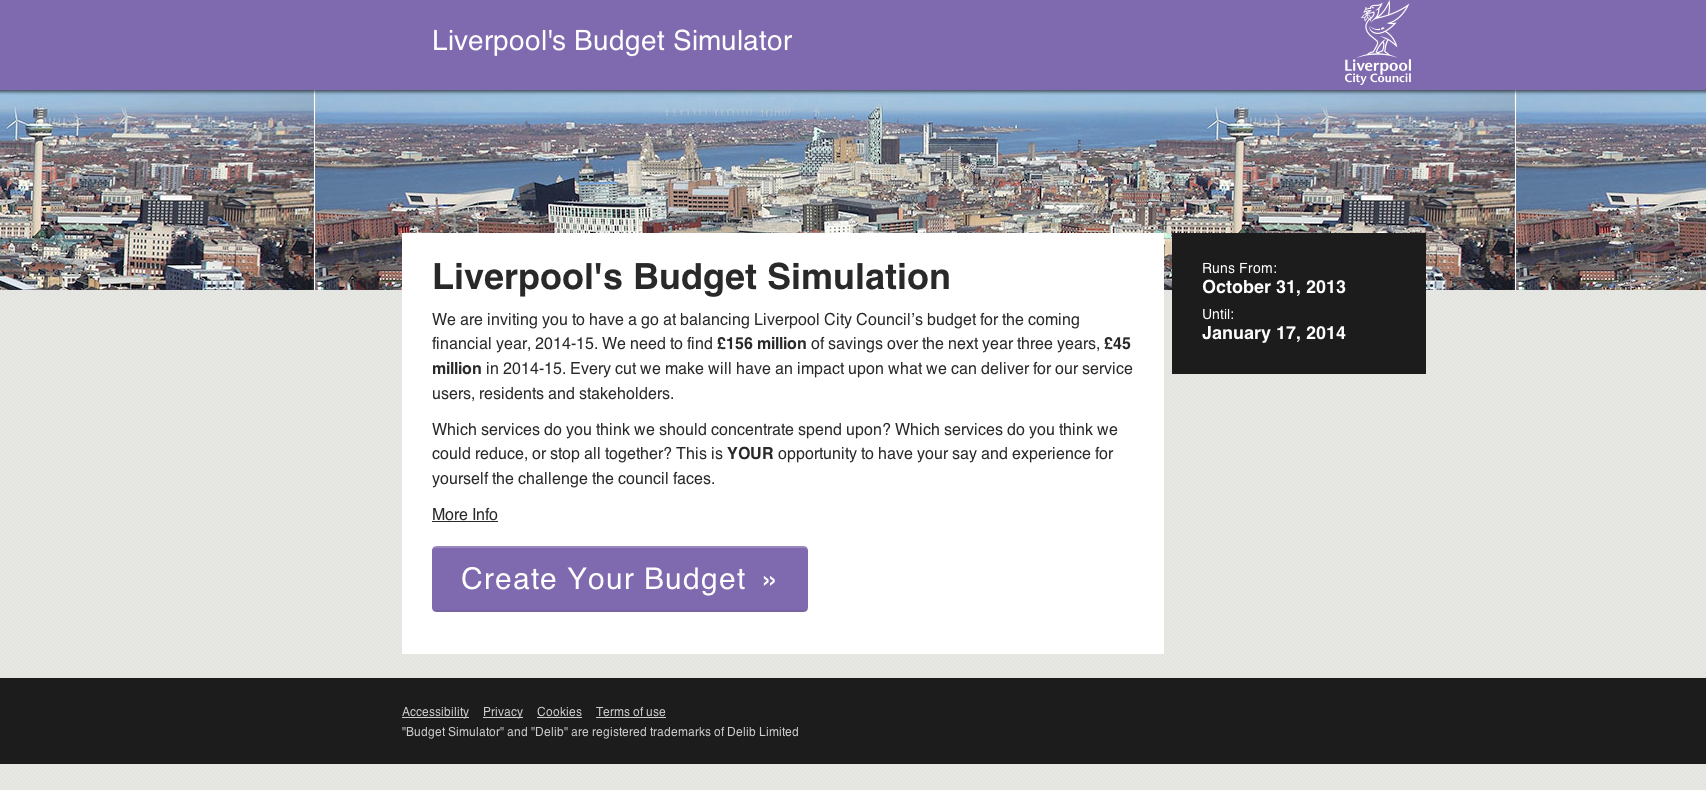 Screen shot of Liverpool's Budget Simulator welcome page